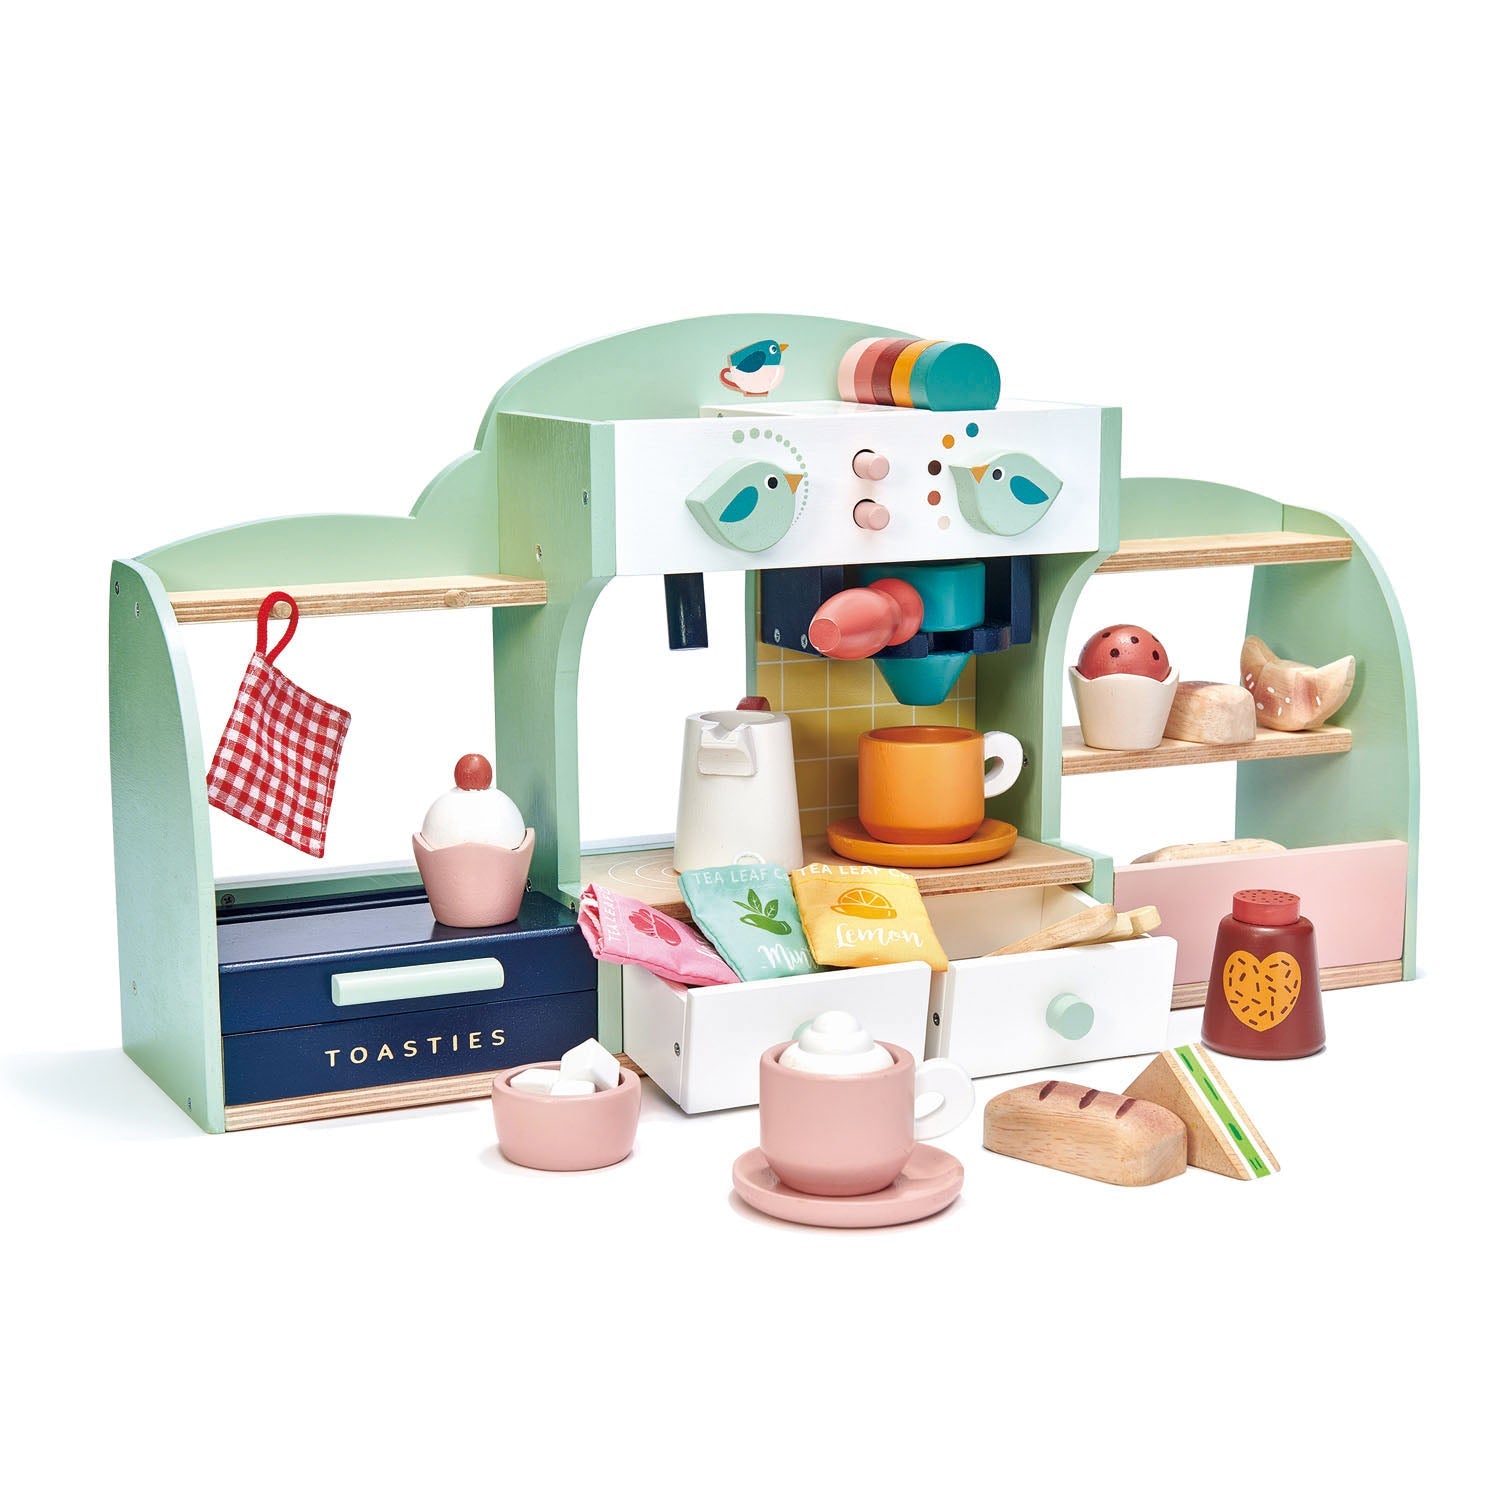 Birds Nest Wooden Toy Cafe by Tender Leaf Toys - A delightful coffee shop-themed toy for gathering friends and honing barista skills. Features double-sided play for hours of fun, gender-neutral design, and learning through imaginative play.